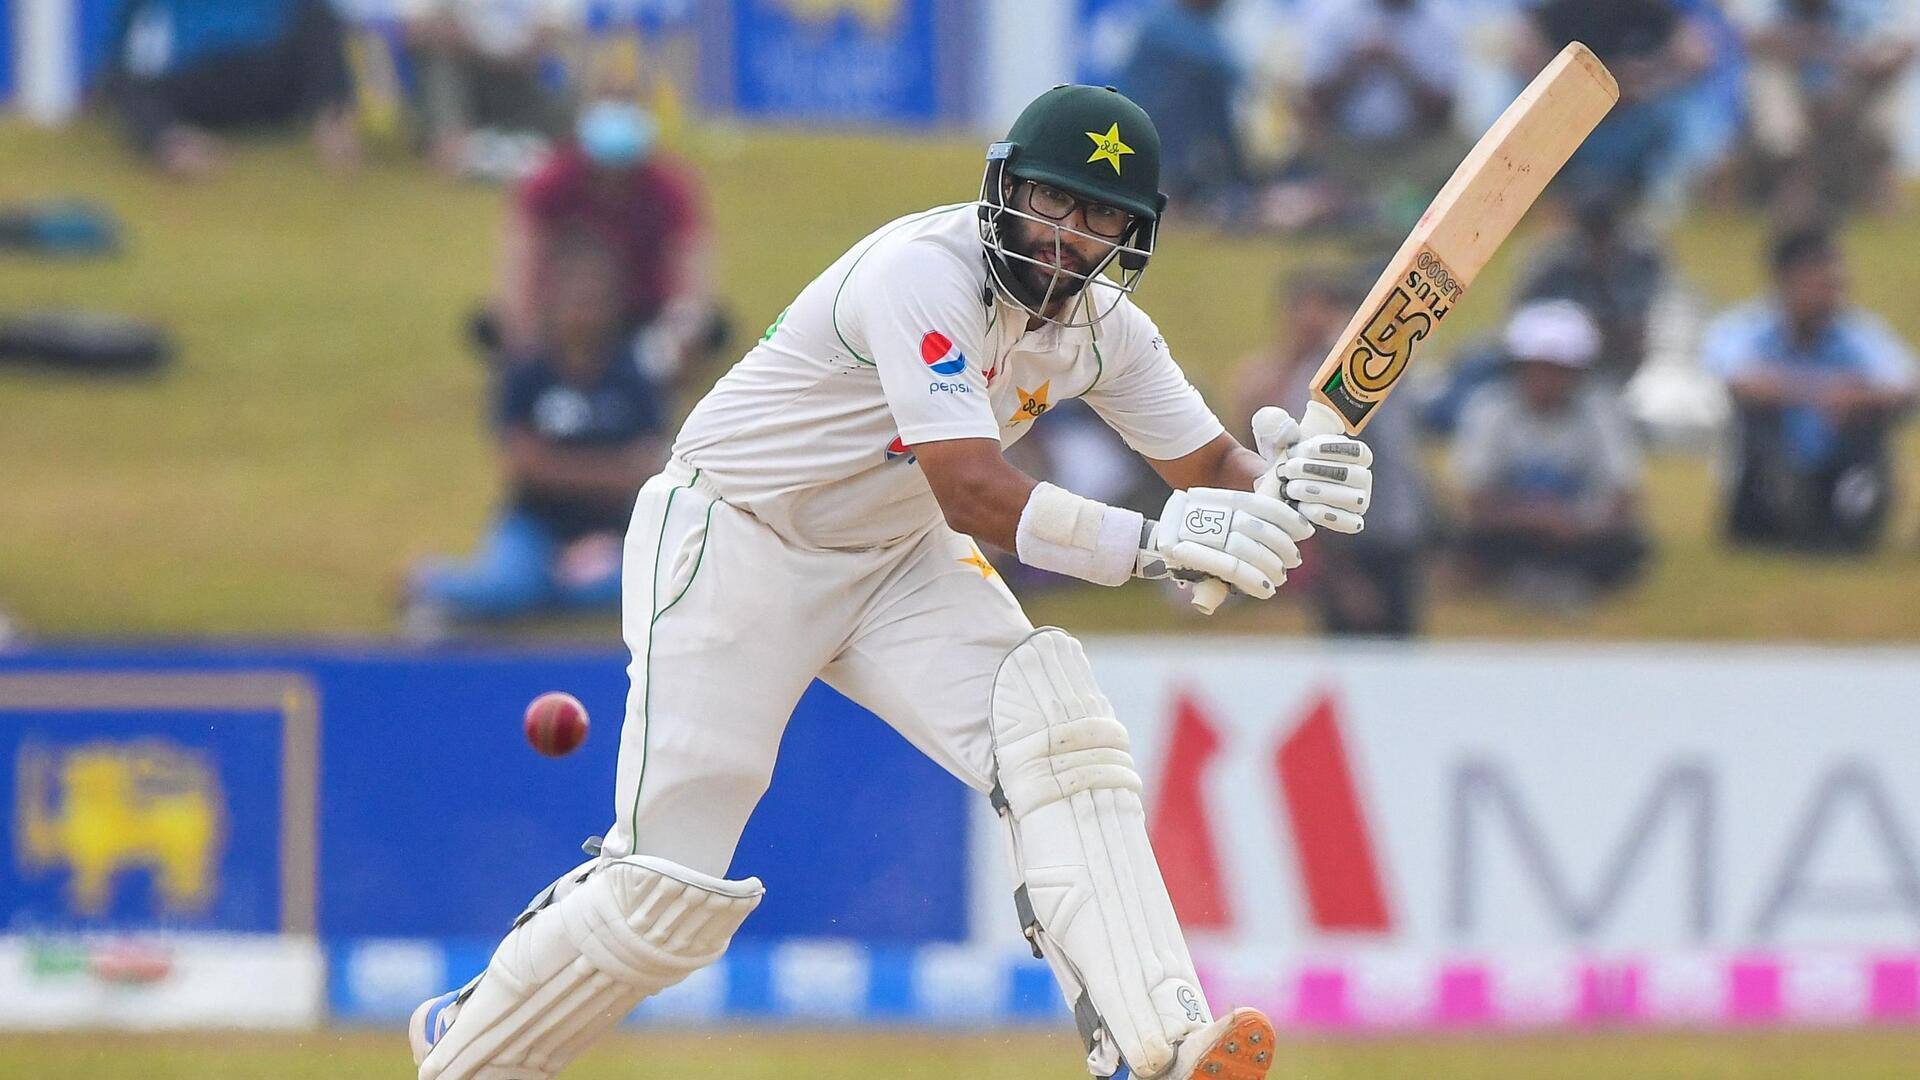 Breaking down Imam-ul-Haq's Test stats away from home: Key stats